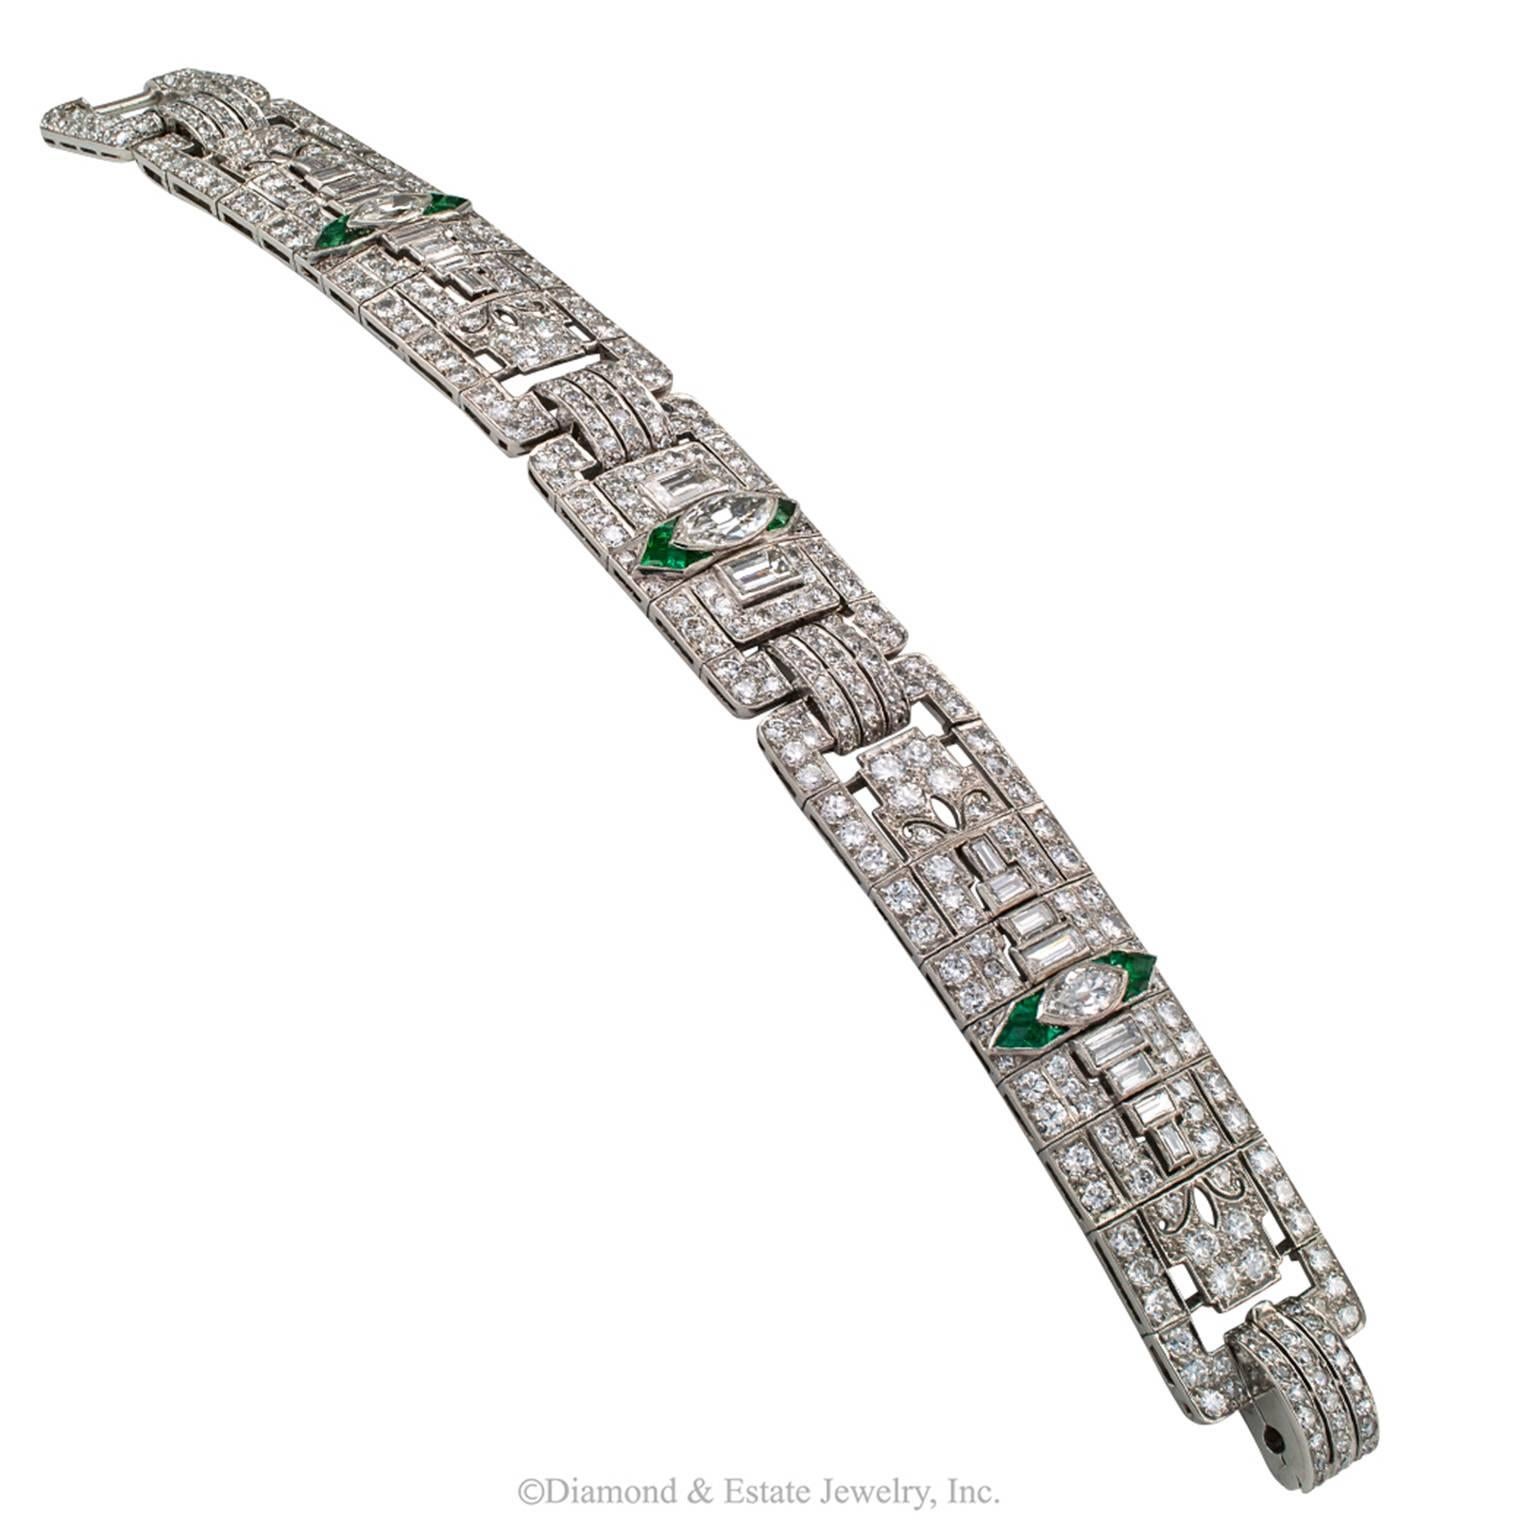 15.50 Carats Diamond Art Deco Platinum Bracelet

15.50 carats diamond and emerald Art Deco platinum bracelet circa 1930.  The wide, geometric-inspired, flexible links are copiously set throughout with diamonds of various shapes and sizes, including